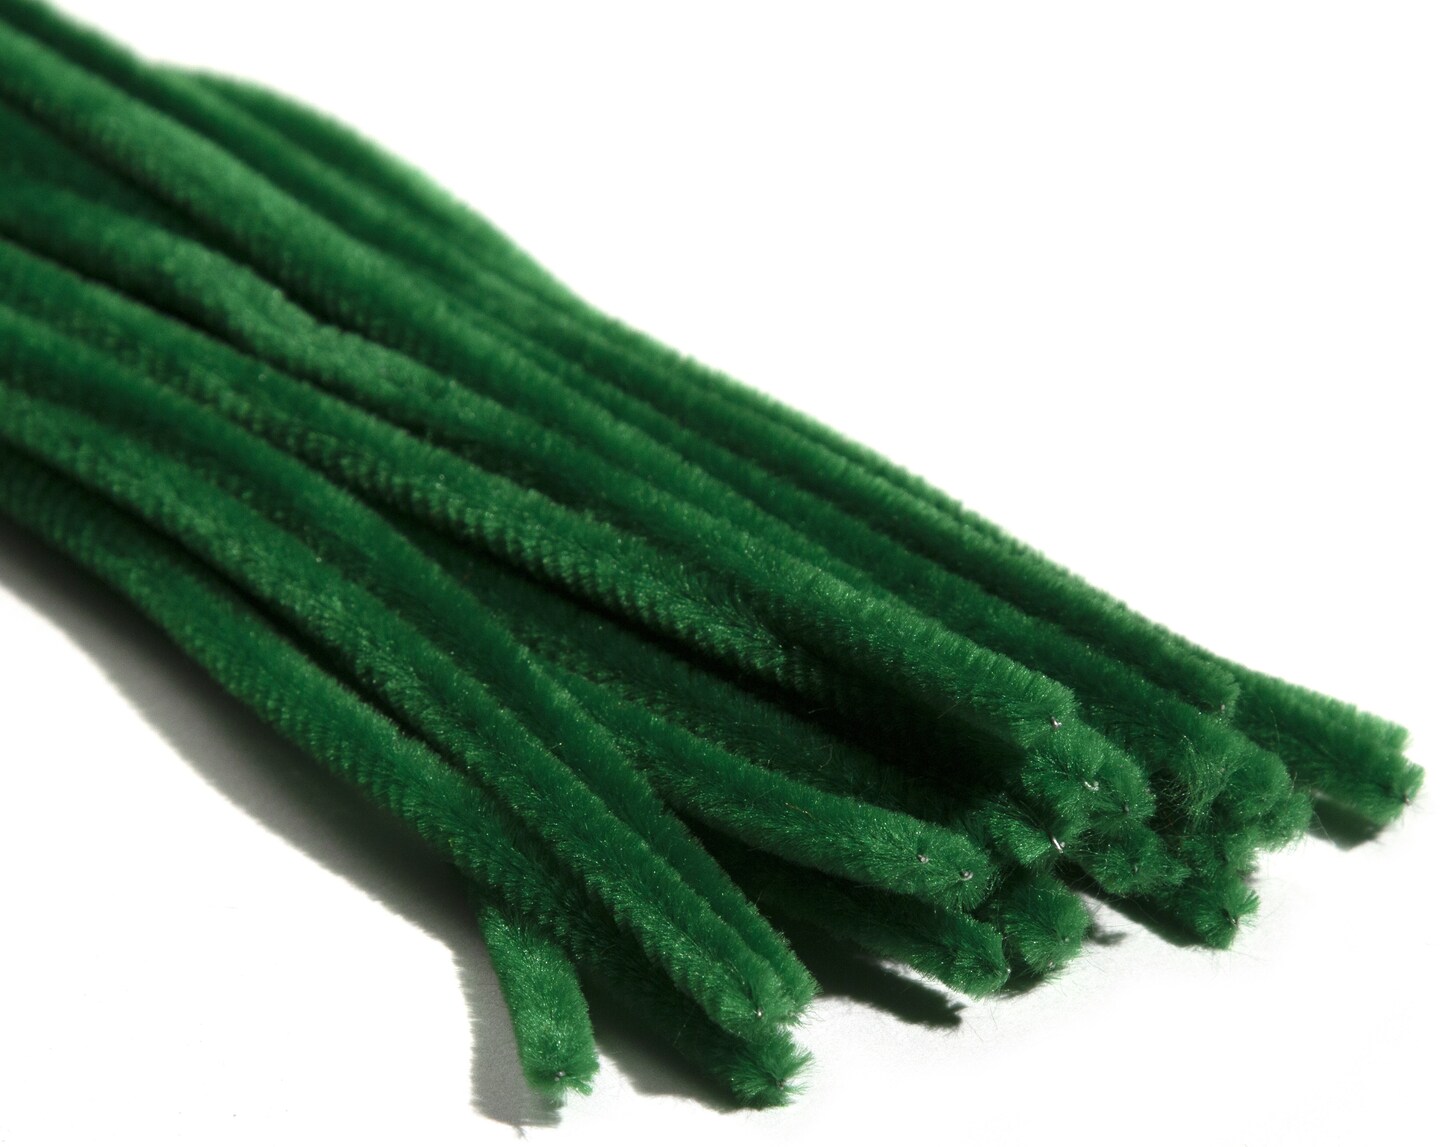 25 x Chenille Stems / Pipe Cleaners - GREEN